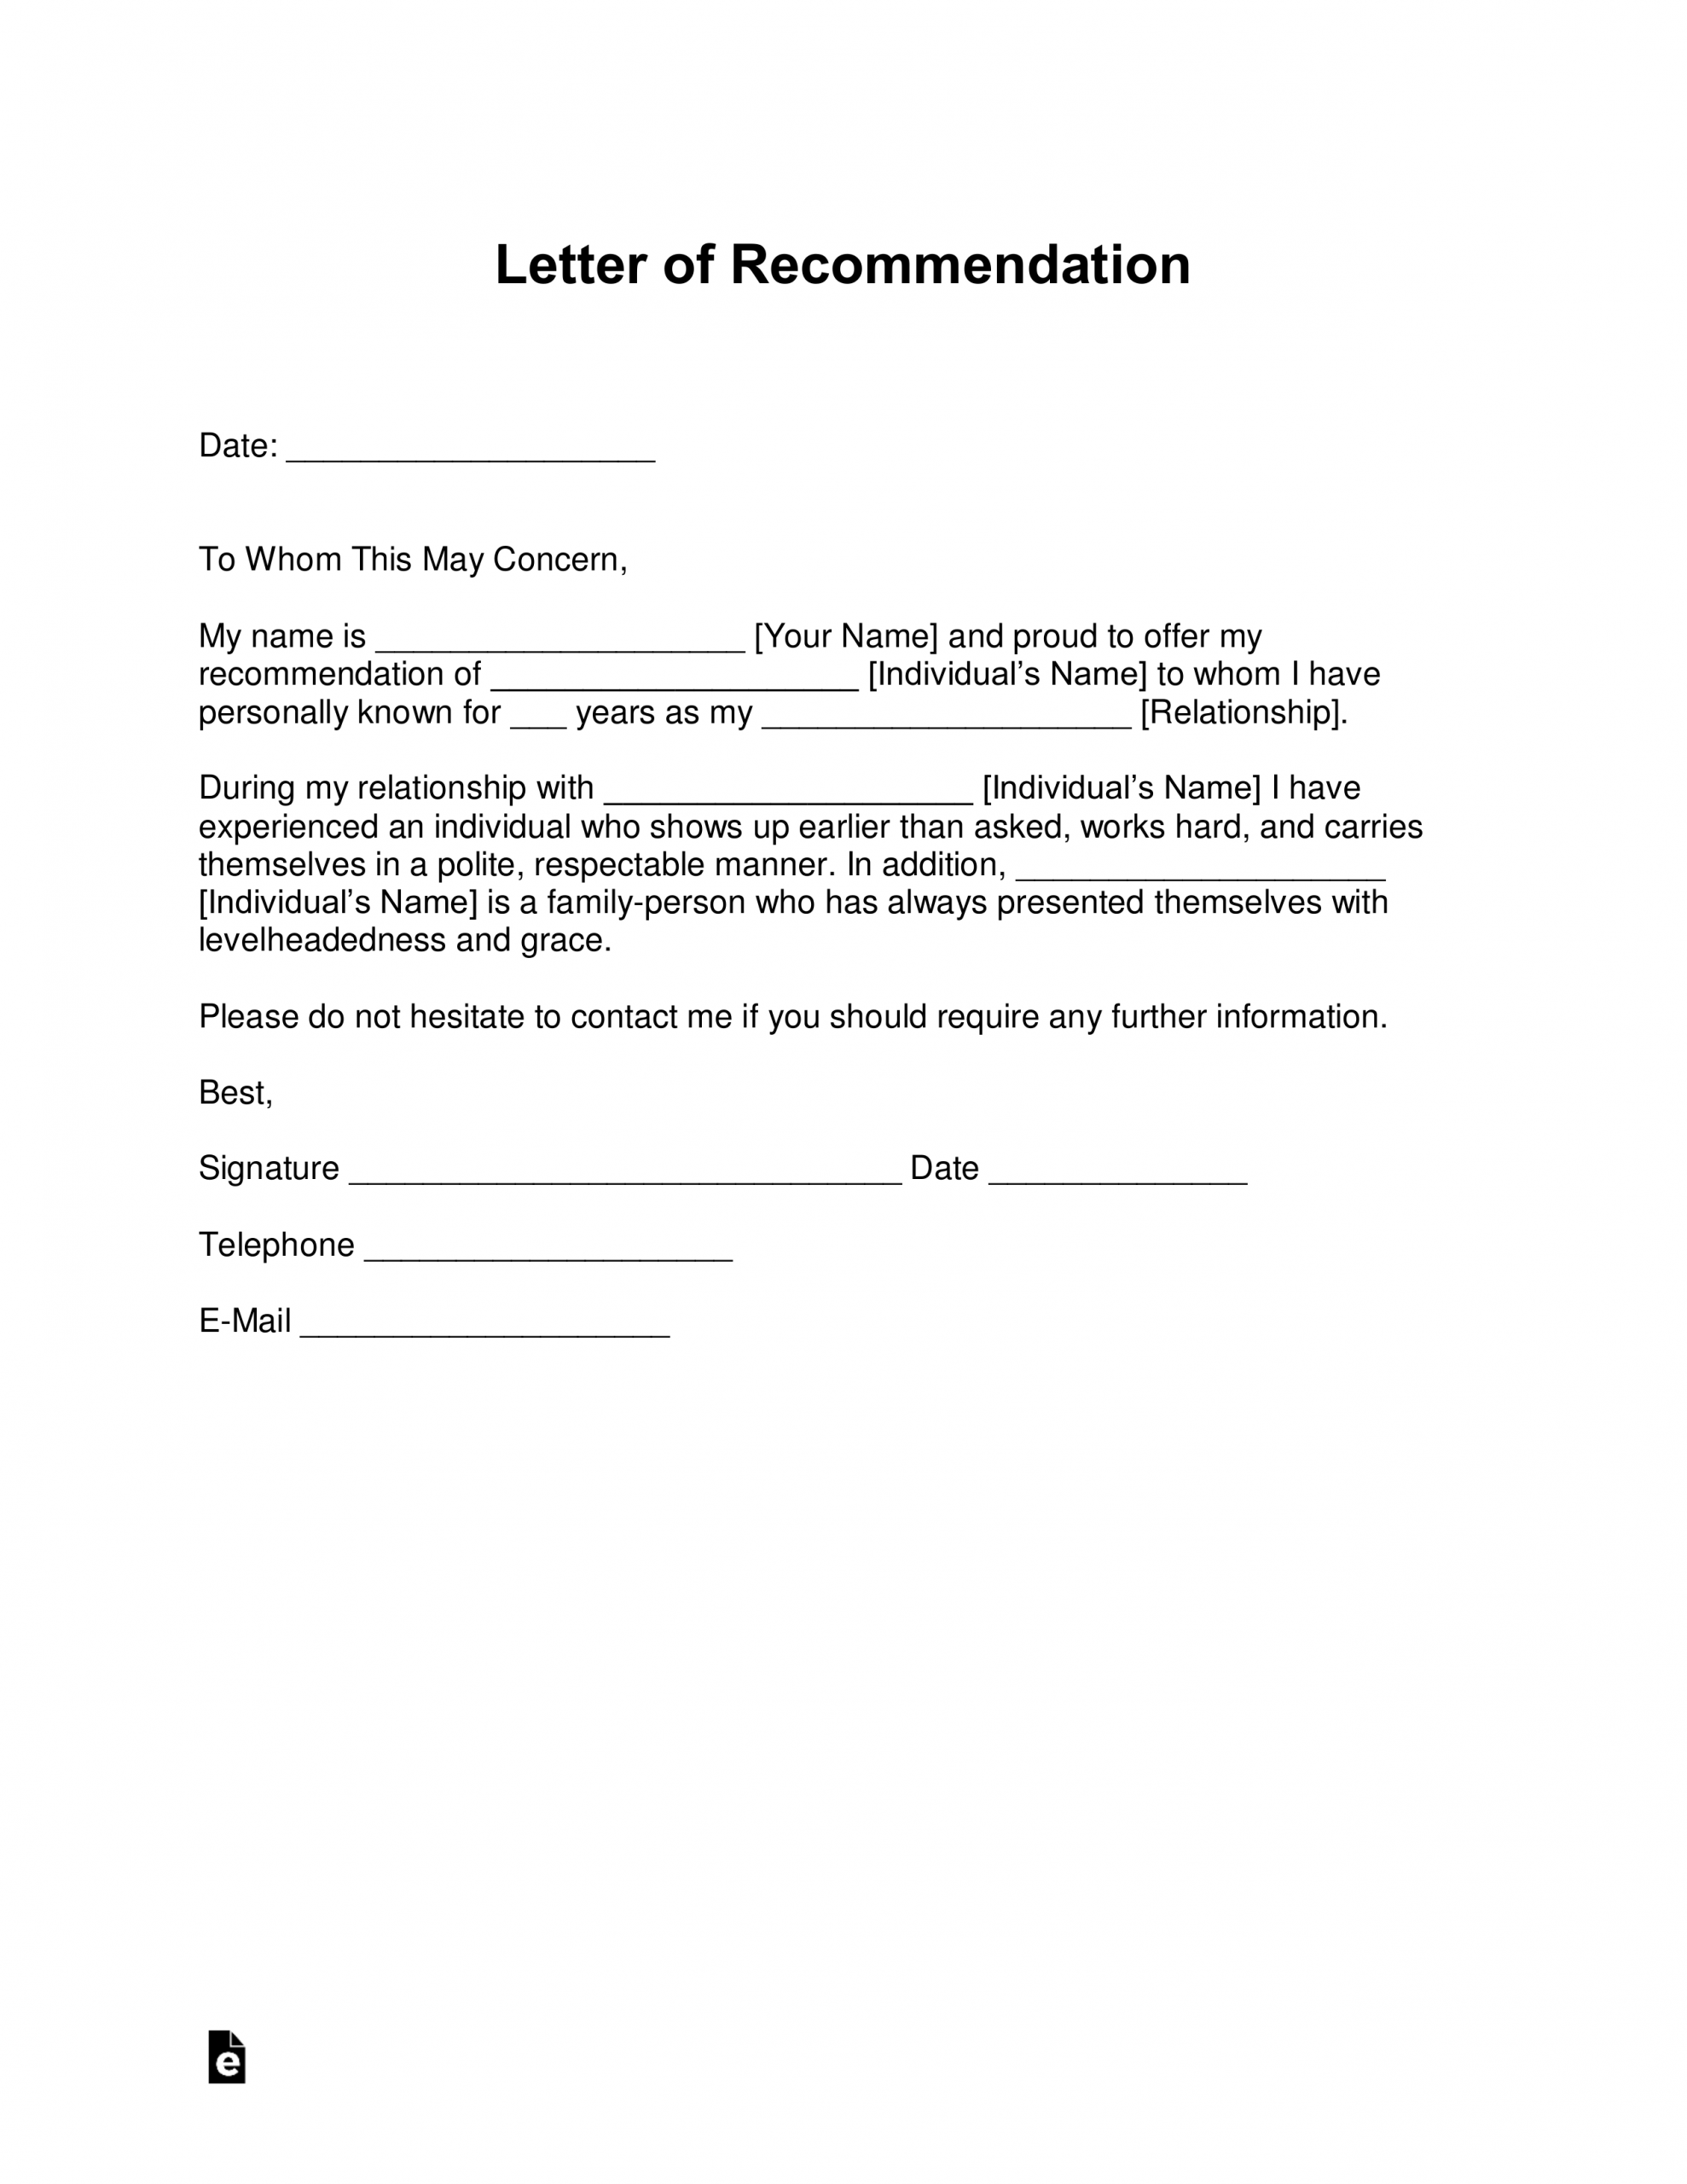 Free Letter Of Recommendation Templates Samples And regarding dimensions 2550 X 3301